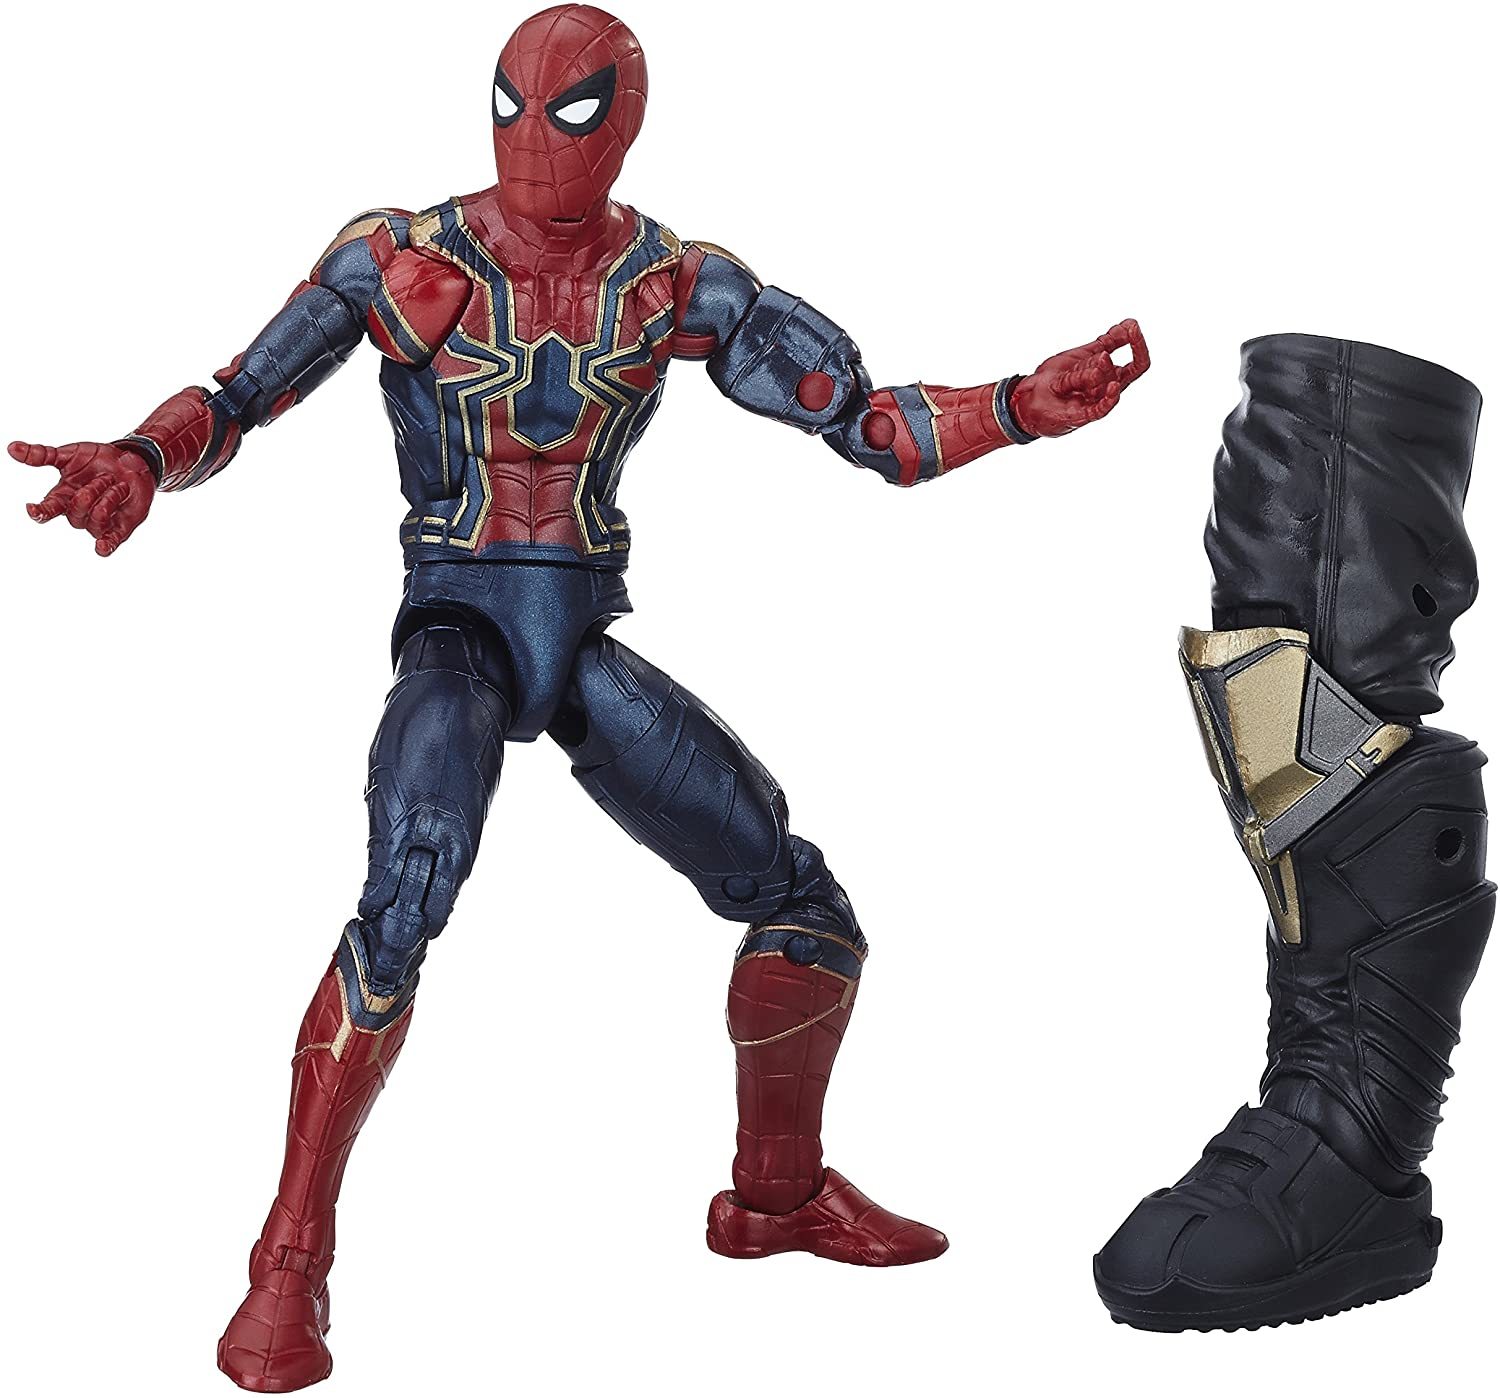 Primary image for  Avengers Marvel Legends 6-in Iron Spider Hi-Articulation Action Figure, Hasbro